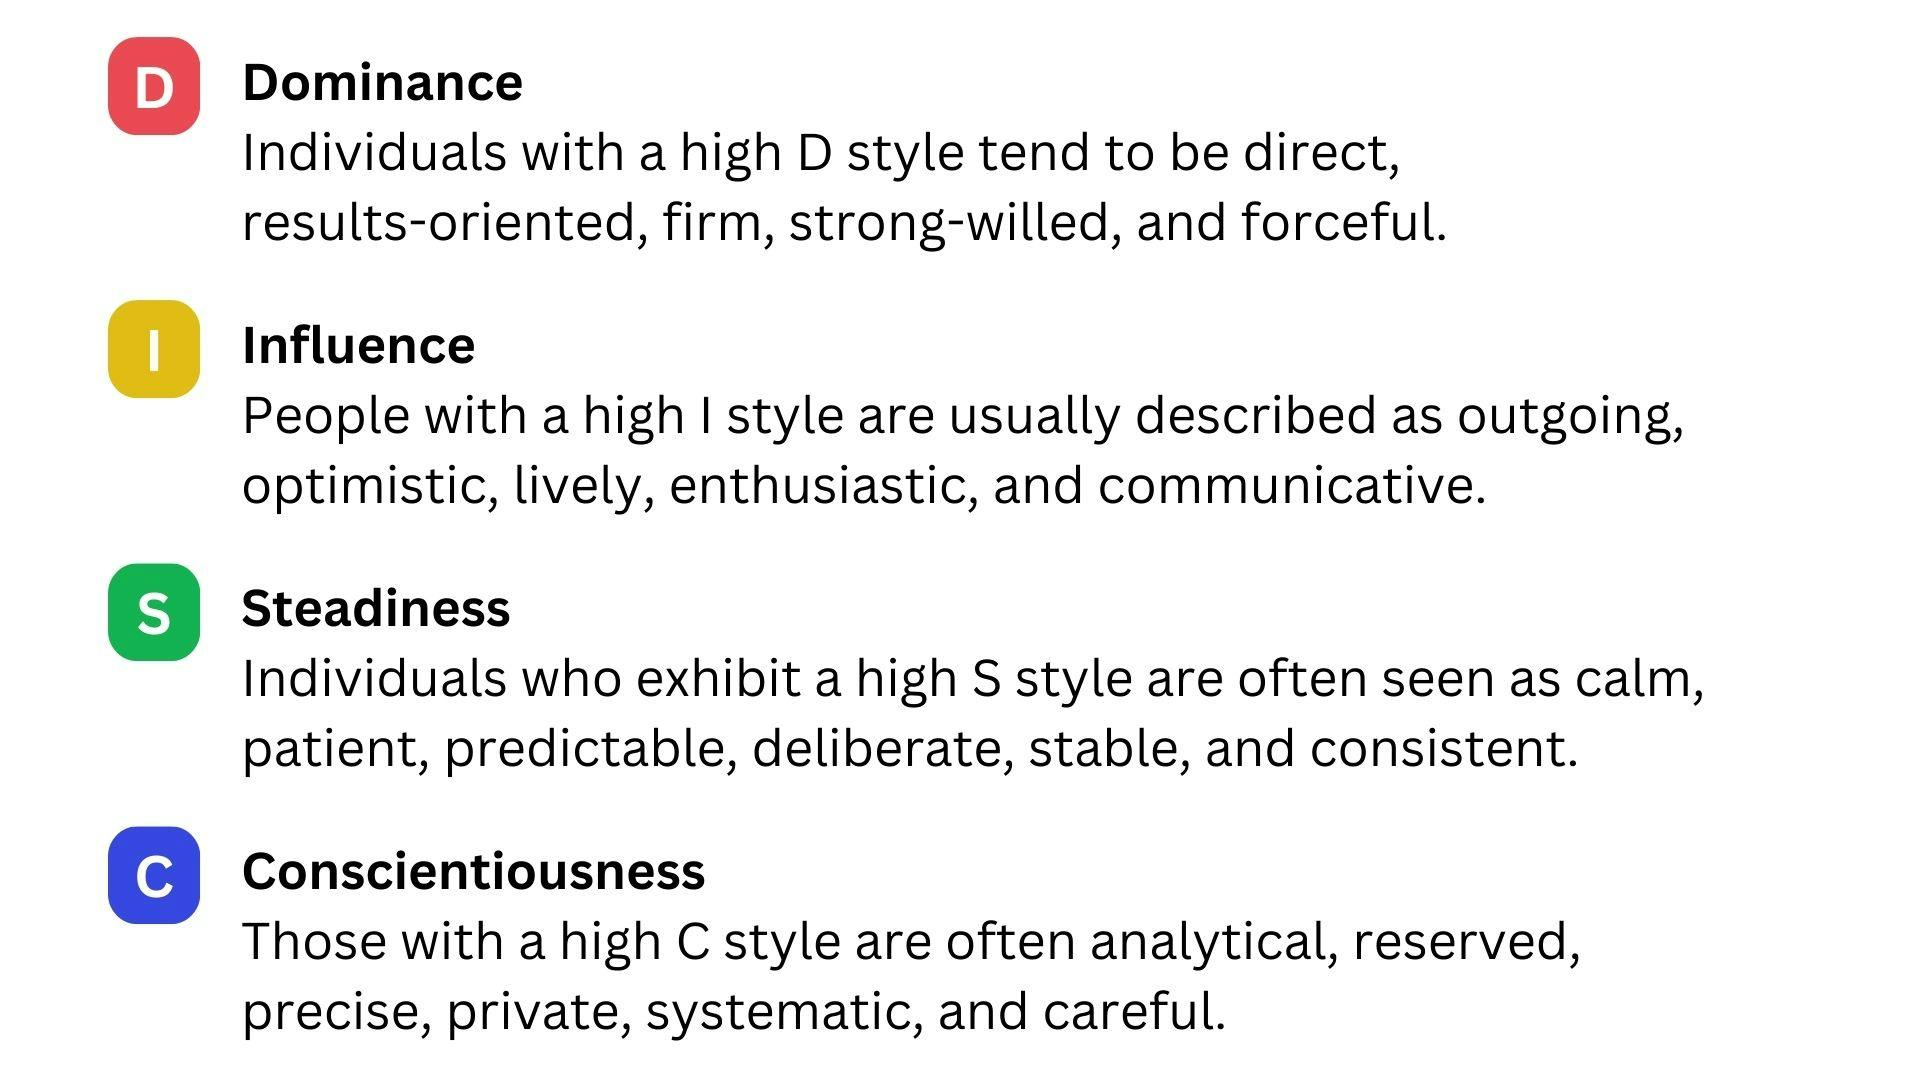 D - Dominance: Individuals with a High D style tend to be direct, results-oriented, firm, strong-willed, and forceful.  I - Influence: People with a high I style are usually described as outgoing, optimistic, lively, enthusiastic, and communicative.  S - Steadiness: Individuals who exhibit a high S style are often seen as calm, patient, predictable, deliberate, stable, and consistent.  C - Conscientiousness: Those with a high C style are often analytical, reserved, precise, private, systematic, and careful.